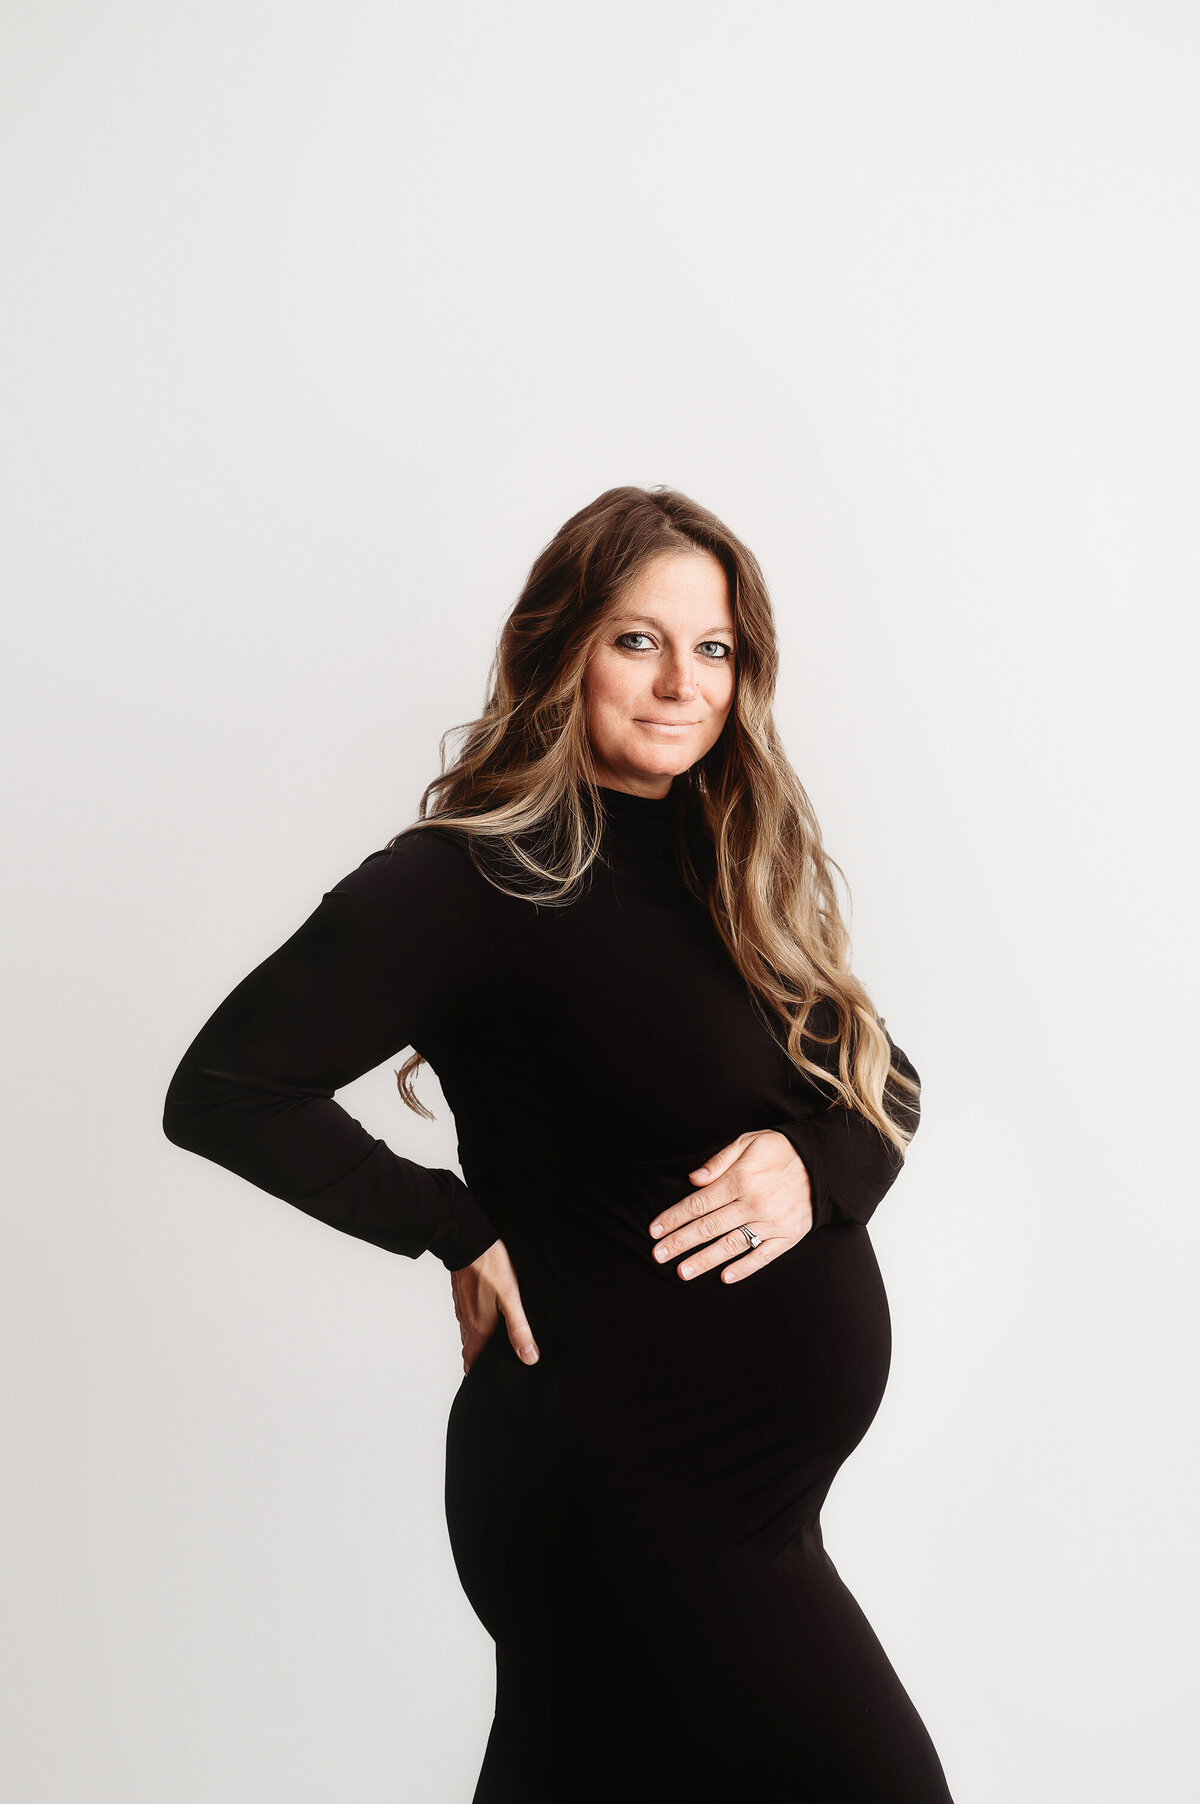 Pregnant woman poses for Studio Maternity Photos in Asheville.